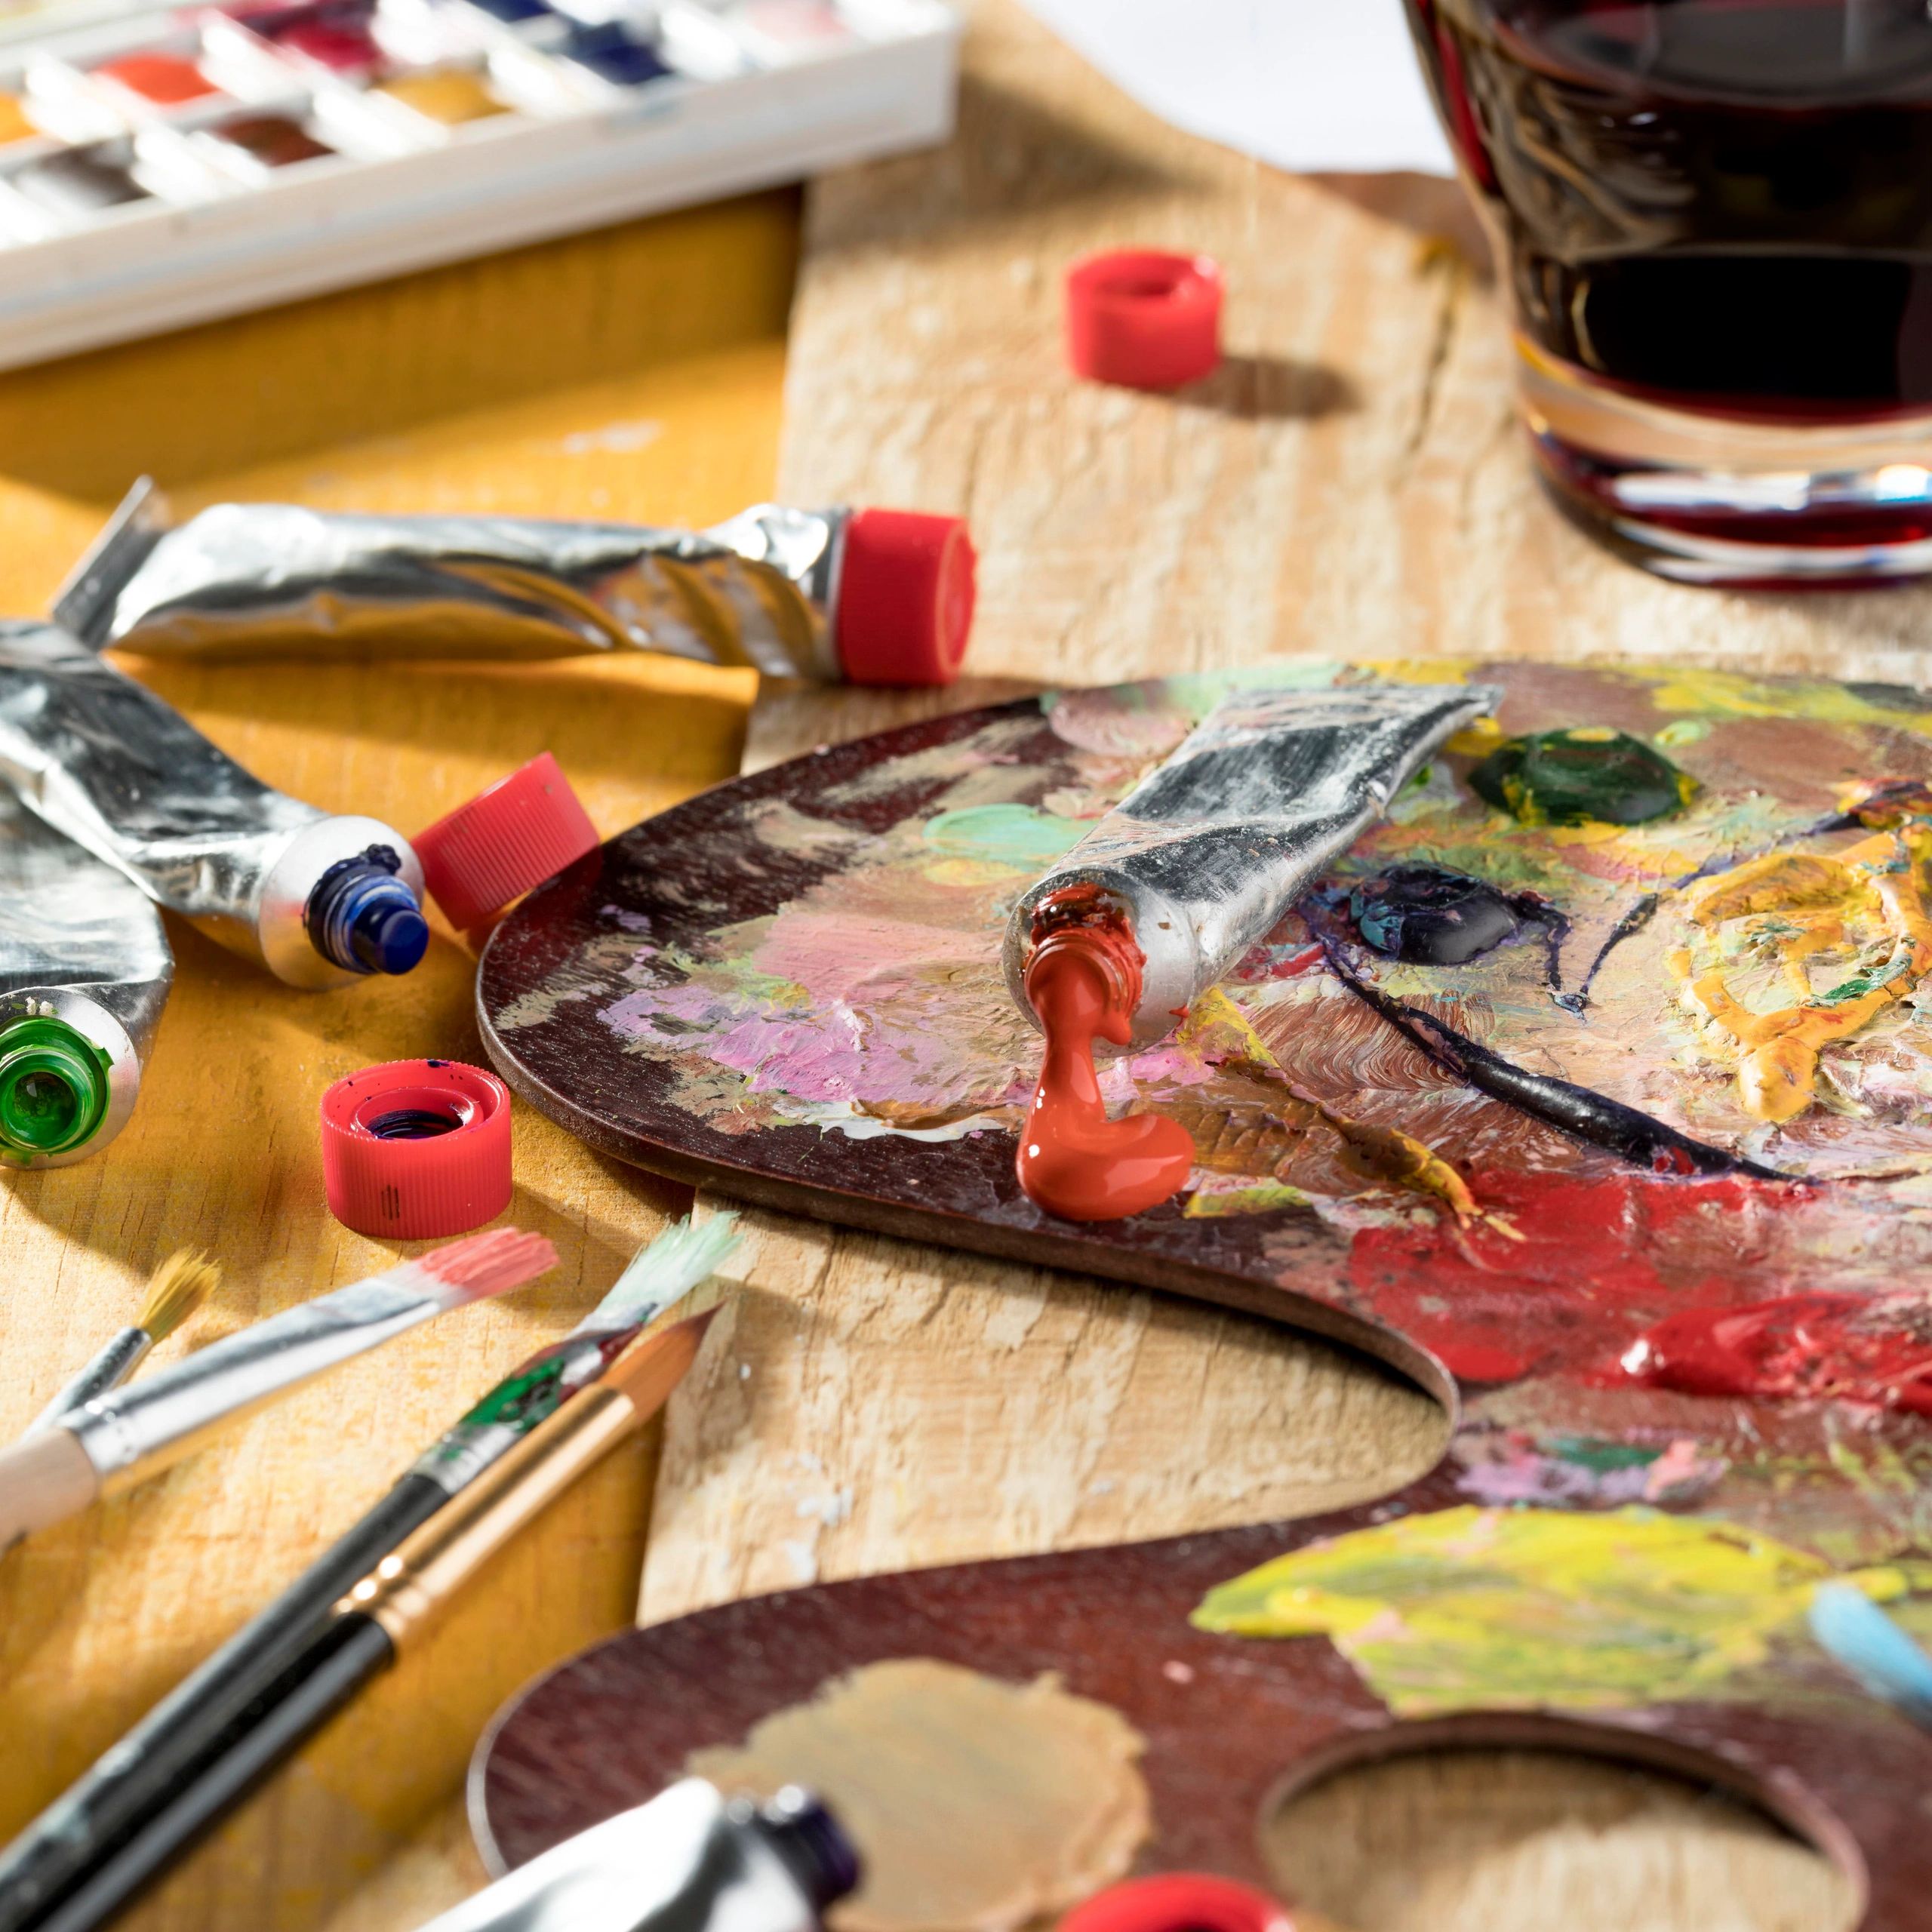 Paint palette with glass of red wine